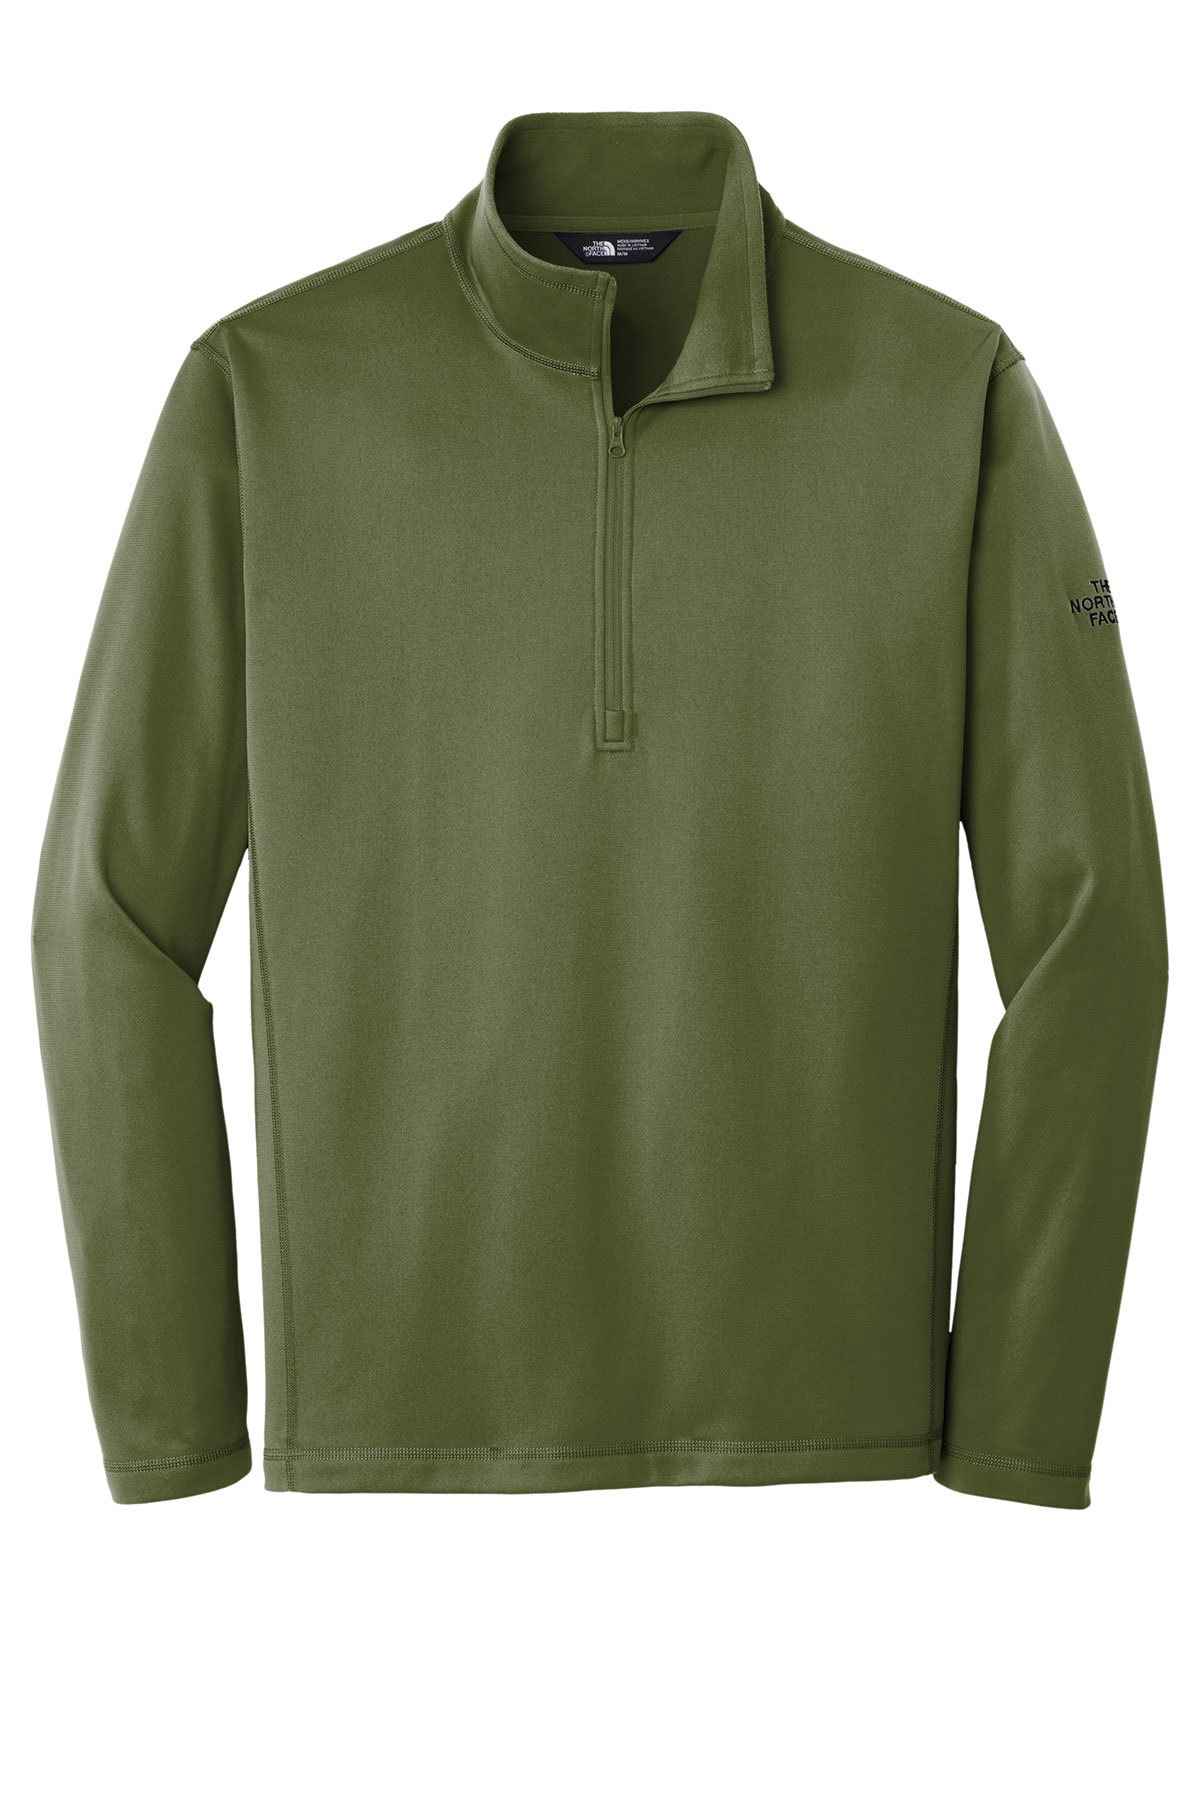 The North Face ® Tech 1/4-Zip Fleece | Product | Company Casuals